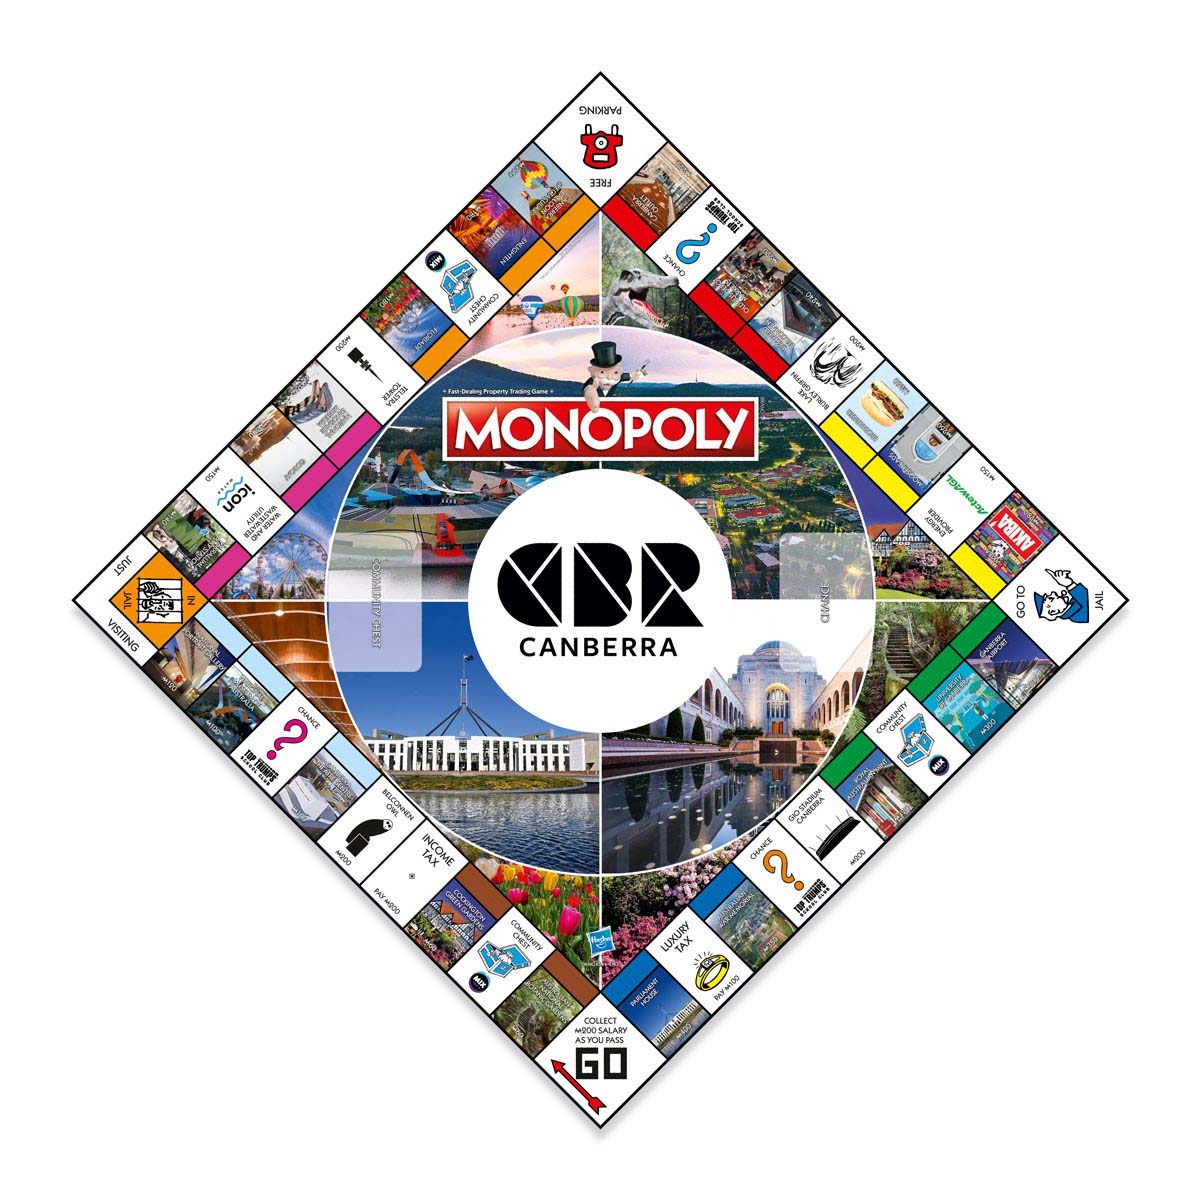 Canberra Monopoly